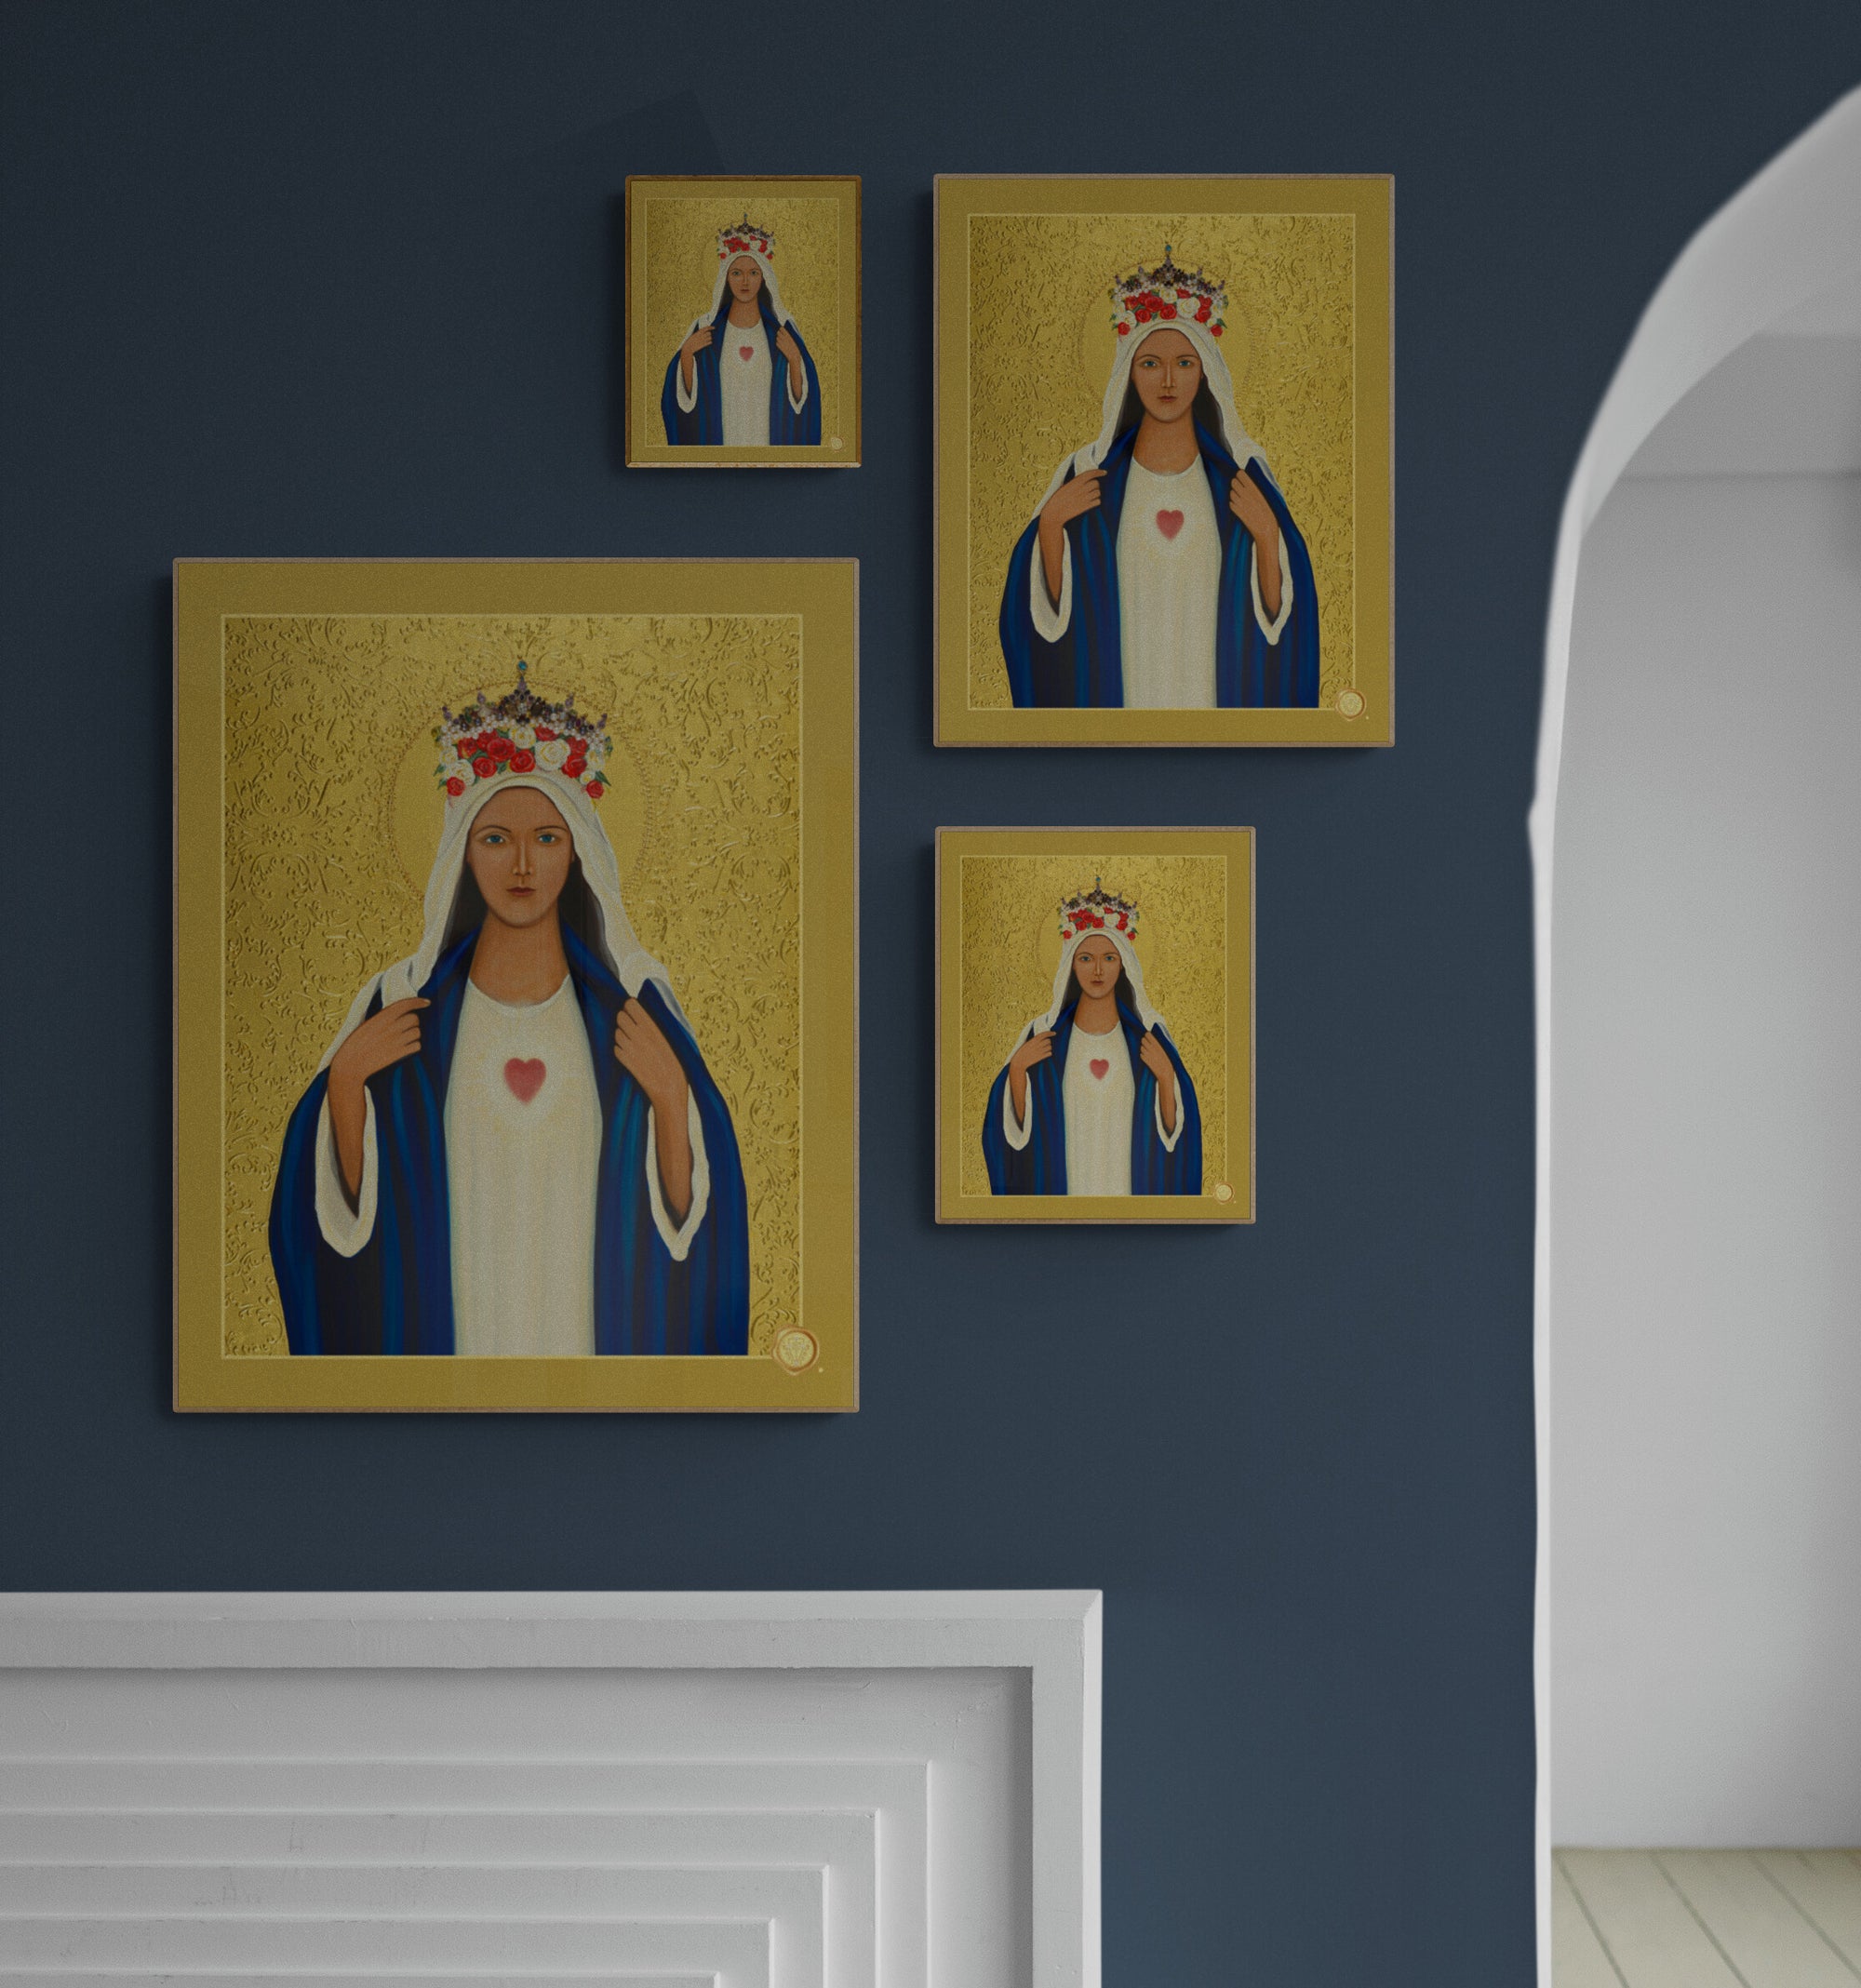 Immaculate Heart of Mary Icon Print